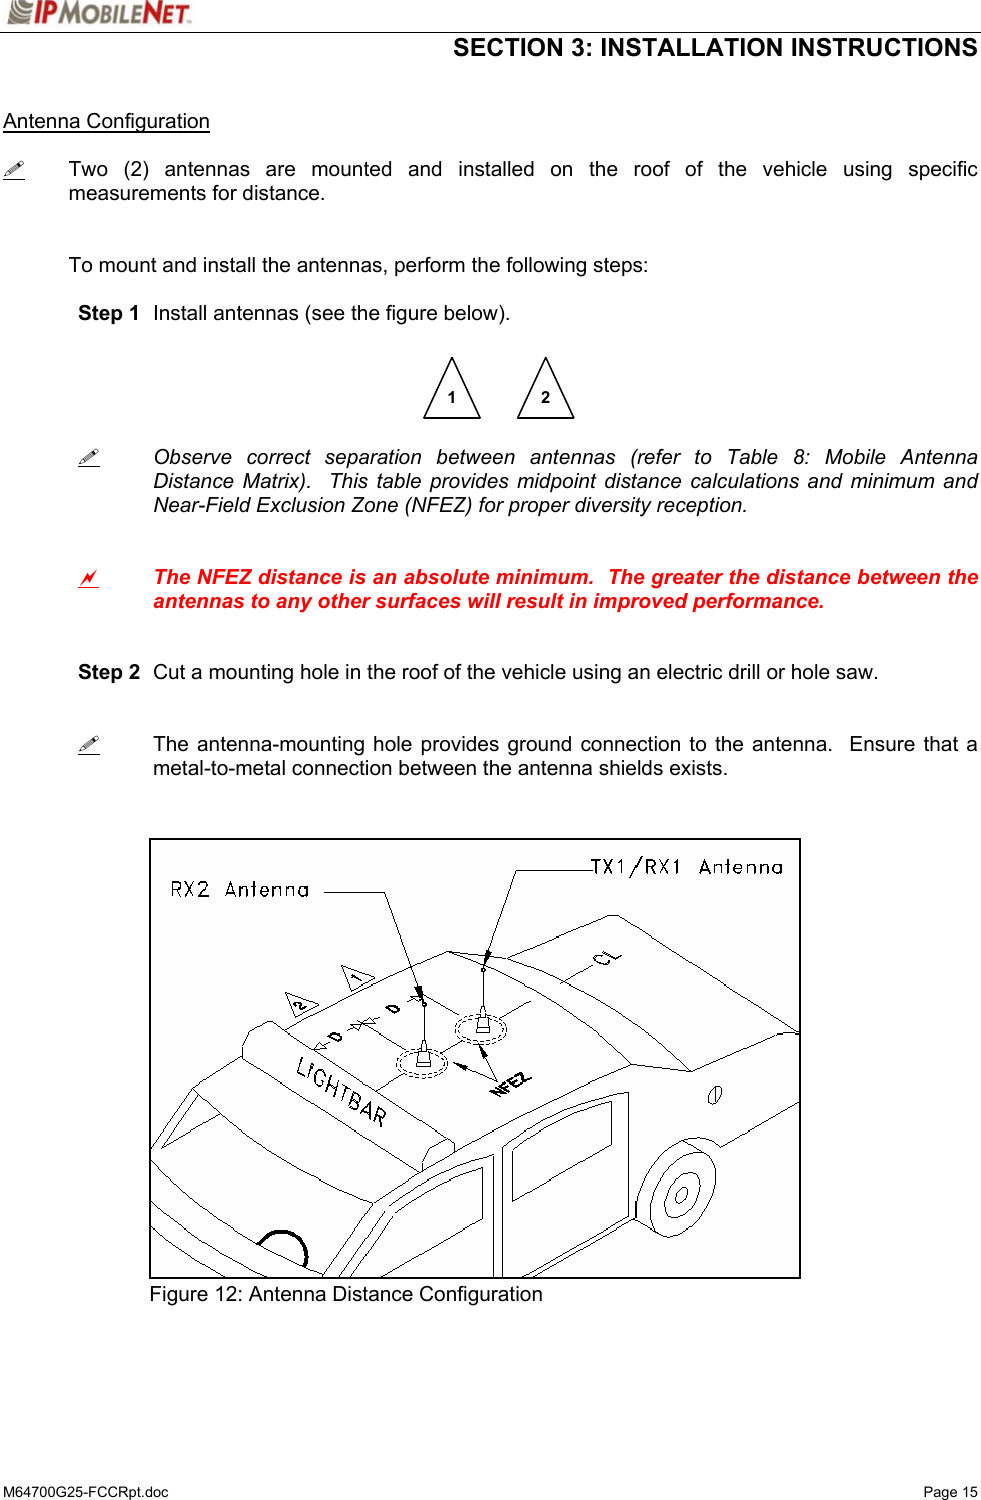  SECTION 3: INSTALLATION INSTRUCTIONS  M64700G25-FCCRpt.doc   Page 15  Antenna Configuration   Two (2) antennas are mounted and installed on the roof of the vehicle using specific measurements for distance.   To mount and install the antennas, perform the following steps:   Step 1  Install antennas (see the figure below).           Observe correct separation between antennas (refer to Table 8: Mobile Antenna   Distance Matrix).  This table provides midpoint distance calculations and minimum and   Near-Field Exclusion Zone (NFEZ) for proper diversity reception.    a The NFEZ distance is an absolute minimum.  The greater the distance between the antennas to any other surfaces will result in improved performance.    Step 2  Cut a mounting hole in the roof of the vehicle using an electric drill or hole saw.      The antenna-mounting hole provides ground connection to the antenna.  Ensure that a metal-to-metal connection between the antenna shields exists.                  Figure 12: Antenna Distance Configuration    1  2 